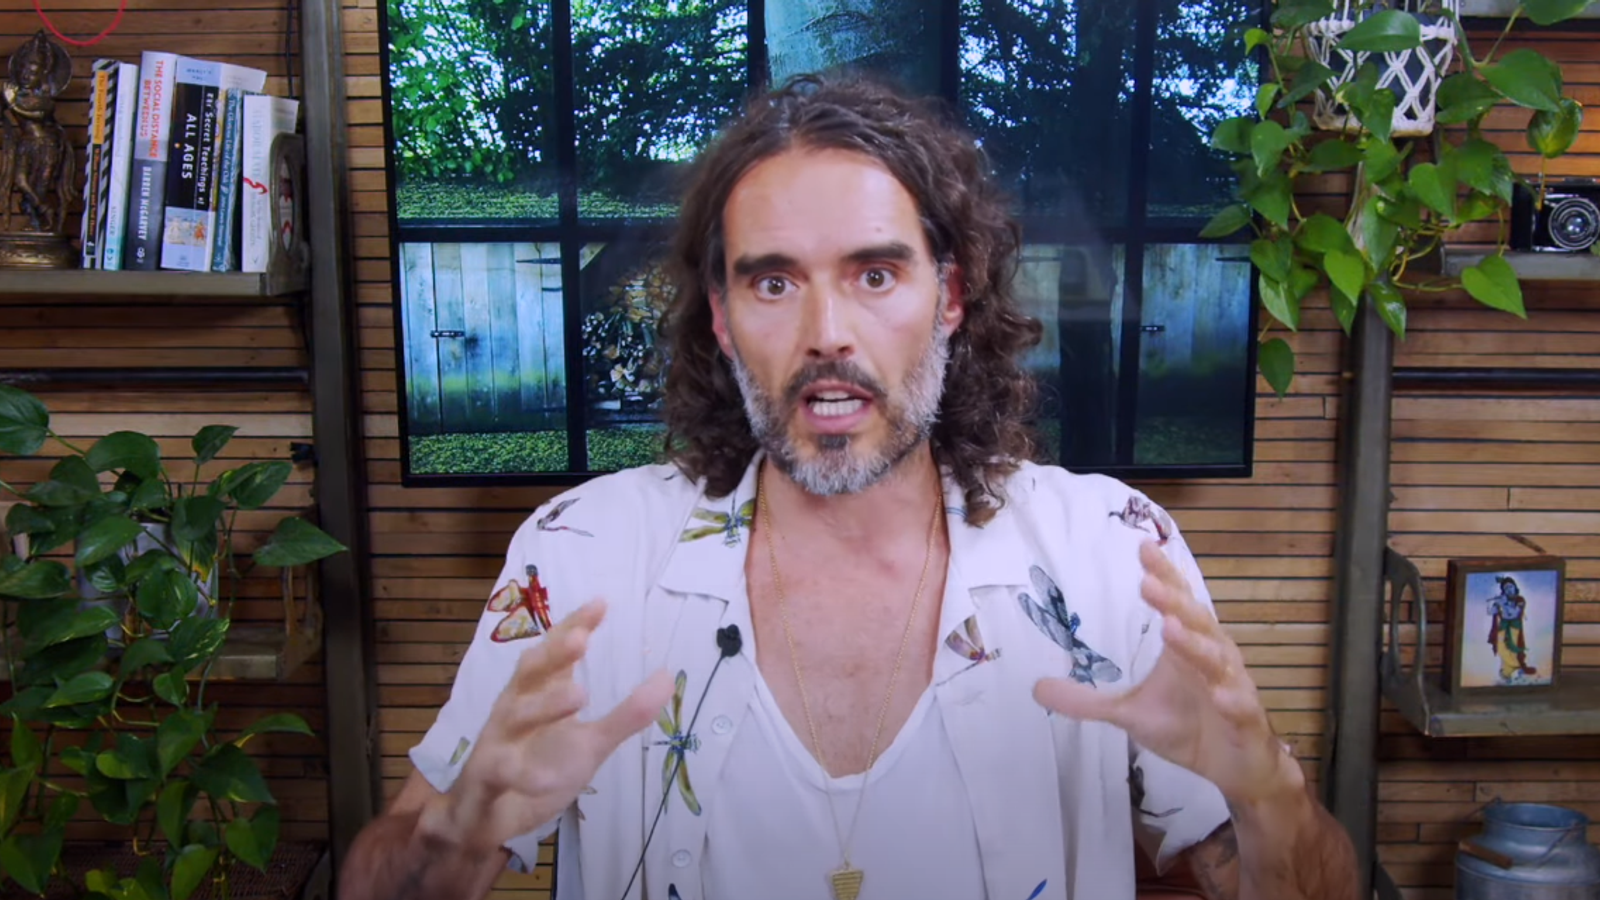 Russell Brand accused of rape, sexual assault and emotional abuse - allegations he denies